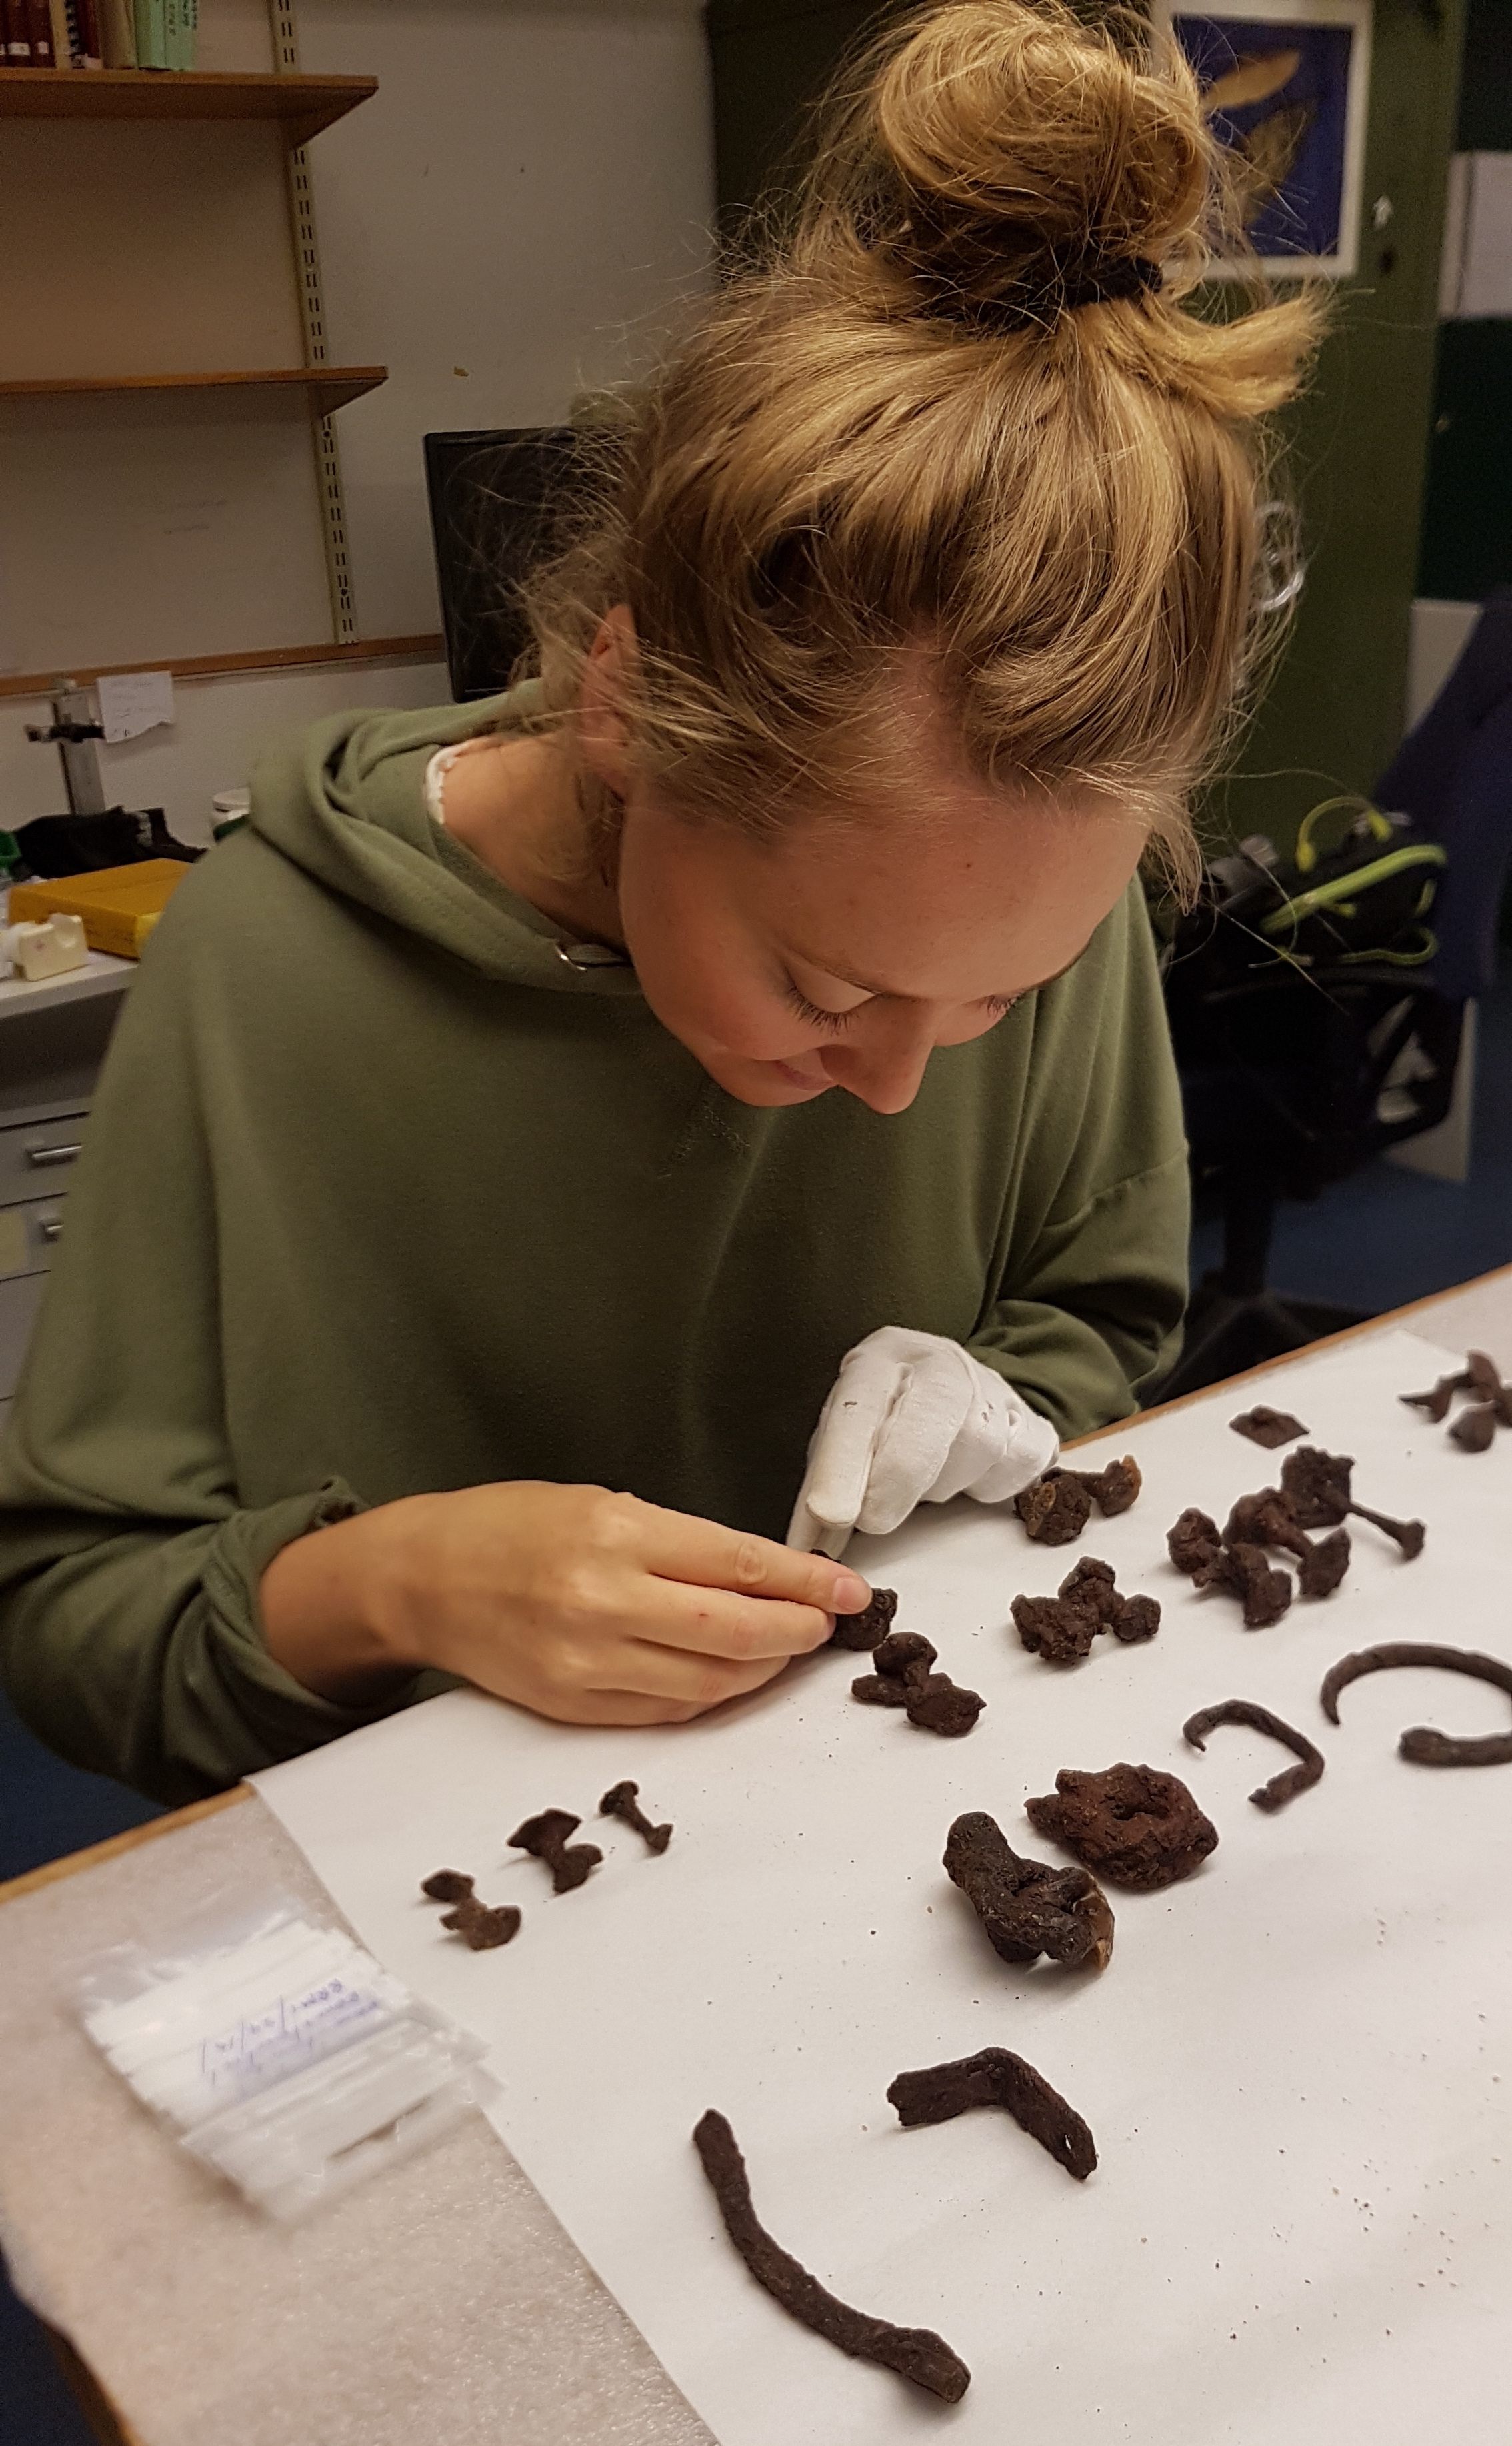 In the 1950s, '60s, and '70s, archaeologists covered many of the Borgund's iron artifacts in wax, making it even harder for archaeologist Brita Hope (pictured) to identify what she's looking at today.